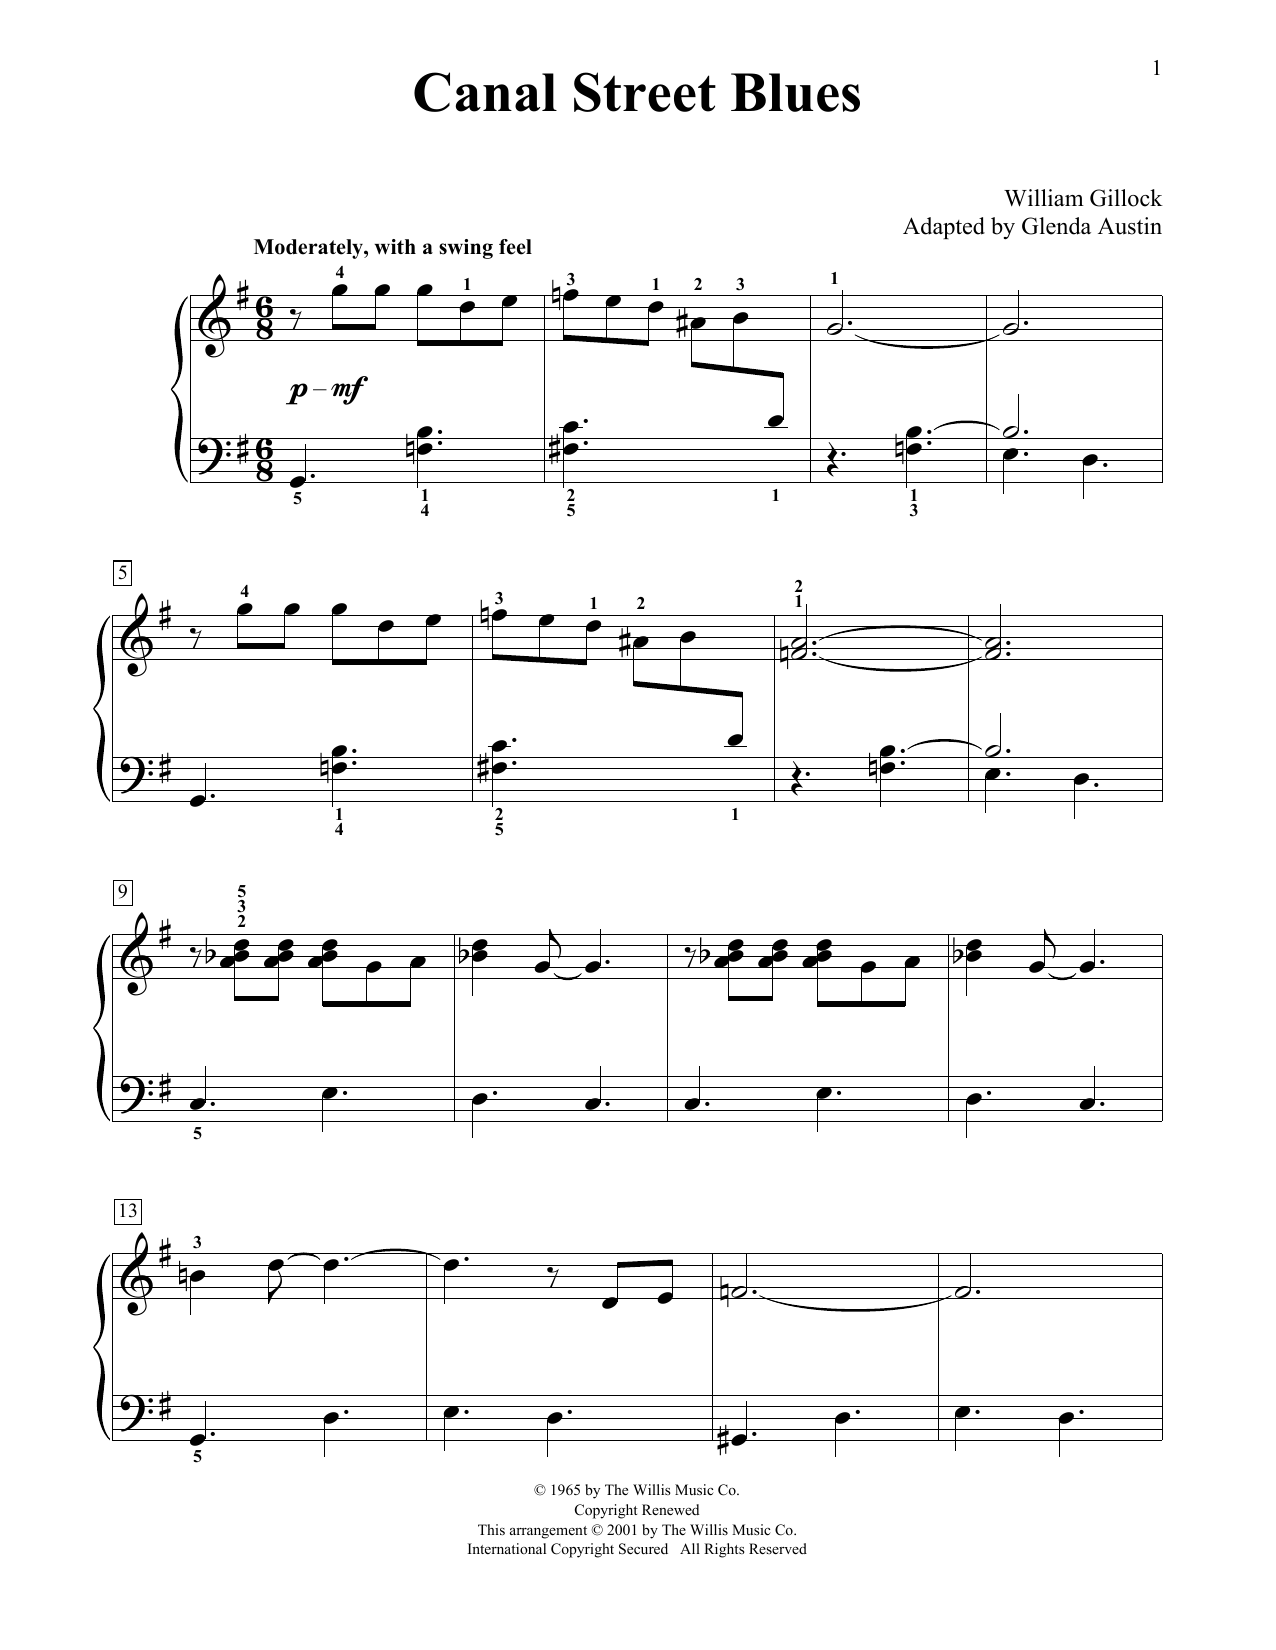 Download William Gillock Canal Street Blues (Simplified) (adapte Sheet Music